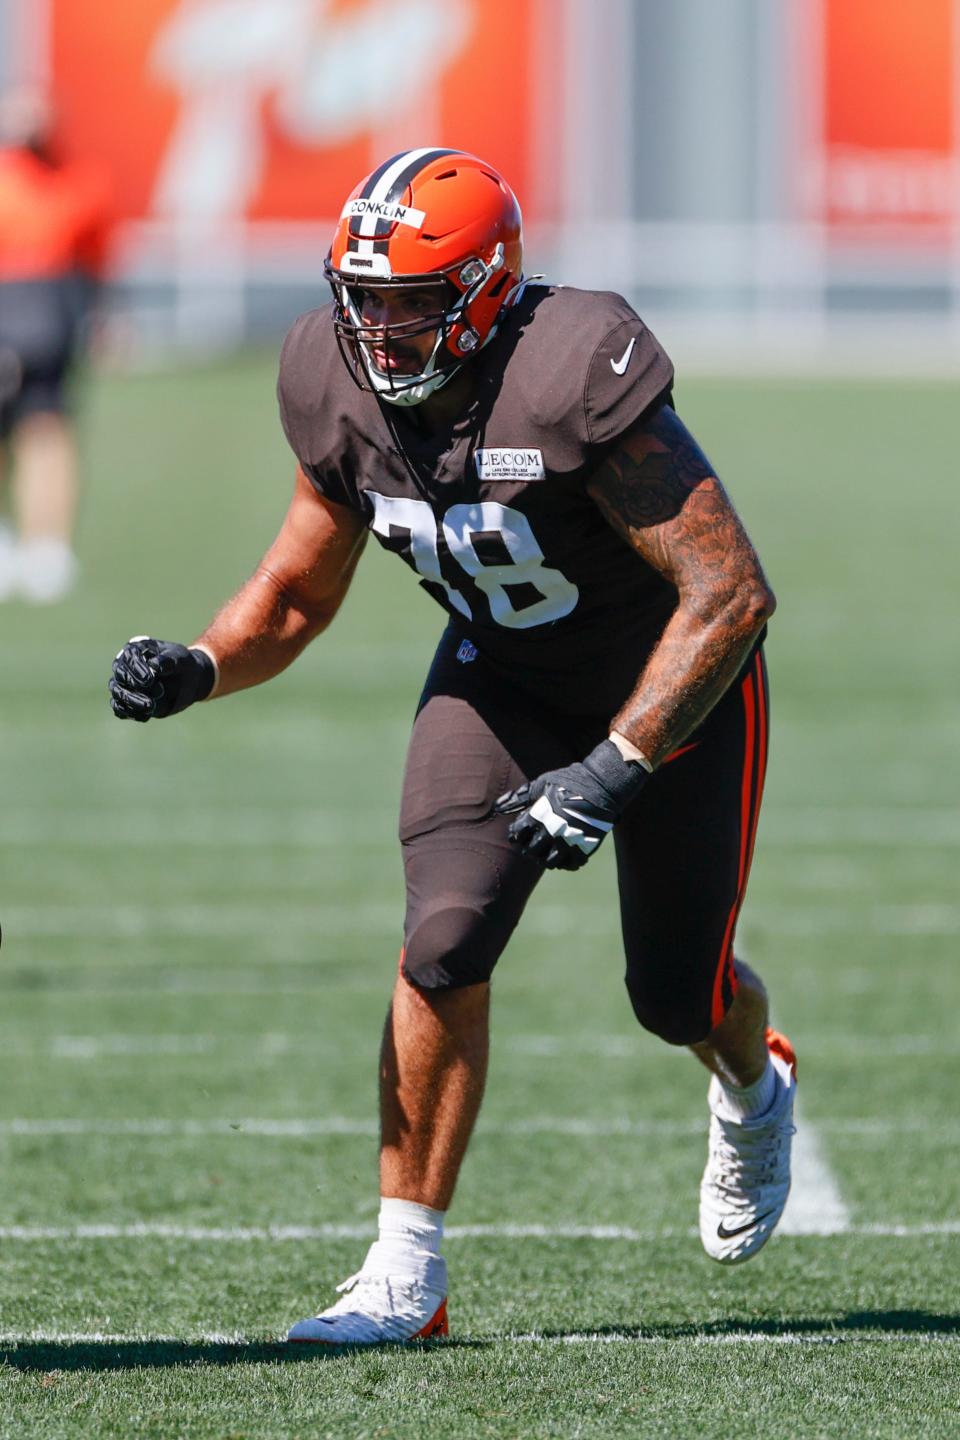 Cleveland Browns offensive tackle Jack Conklin runs through a drill during practice at the NFL football team's training facility Wednesday, Aug. 19, 2020, in Berea, Ohio. (AP Photo/Ron Schwane)